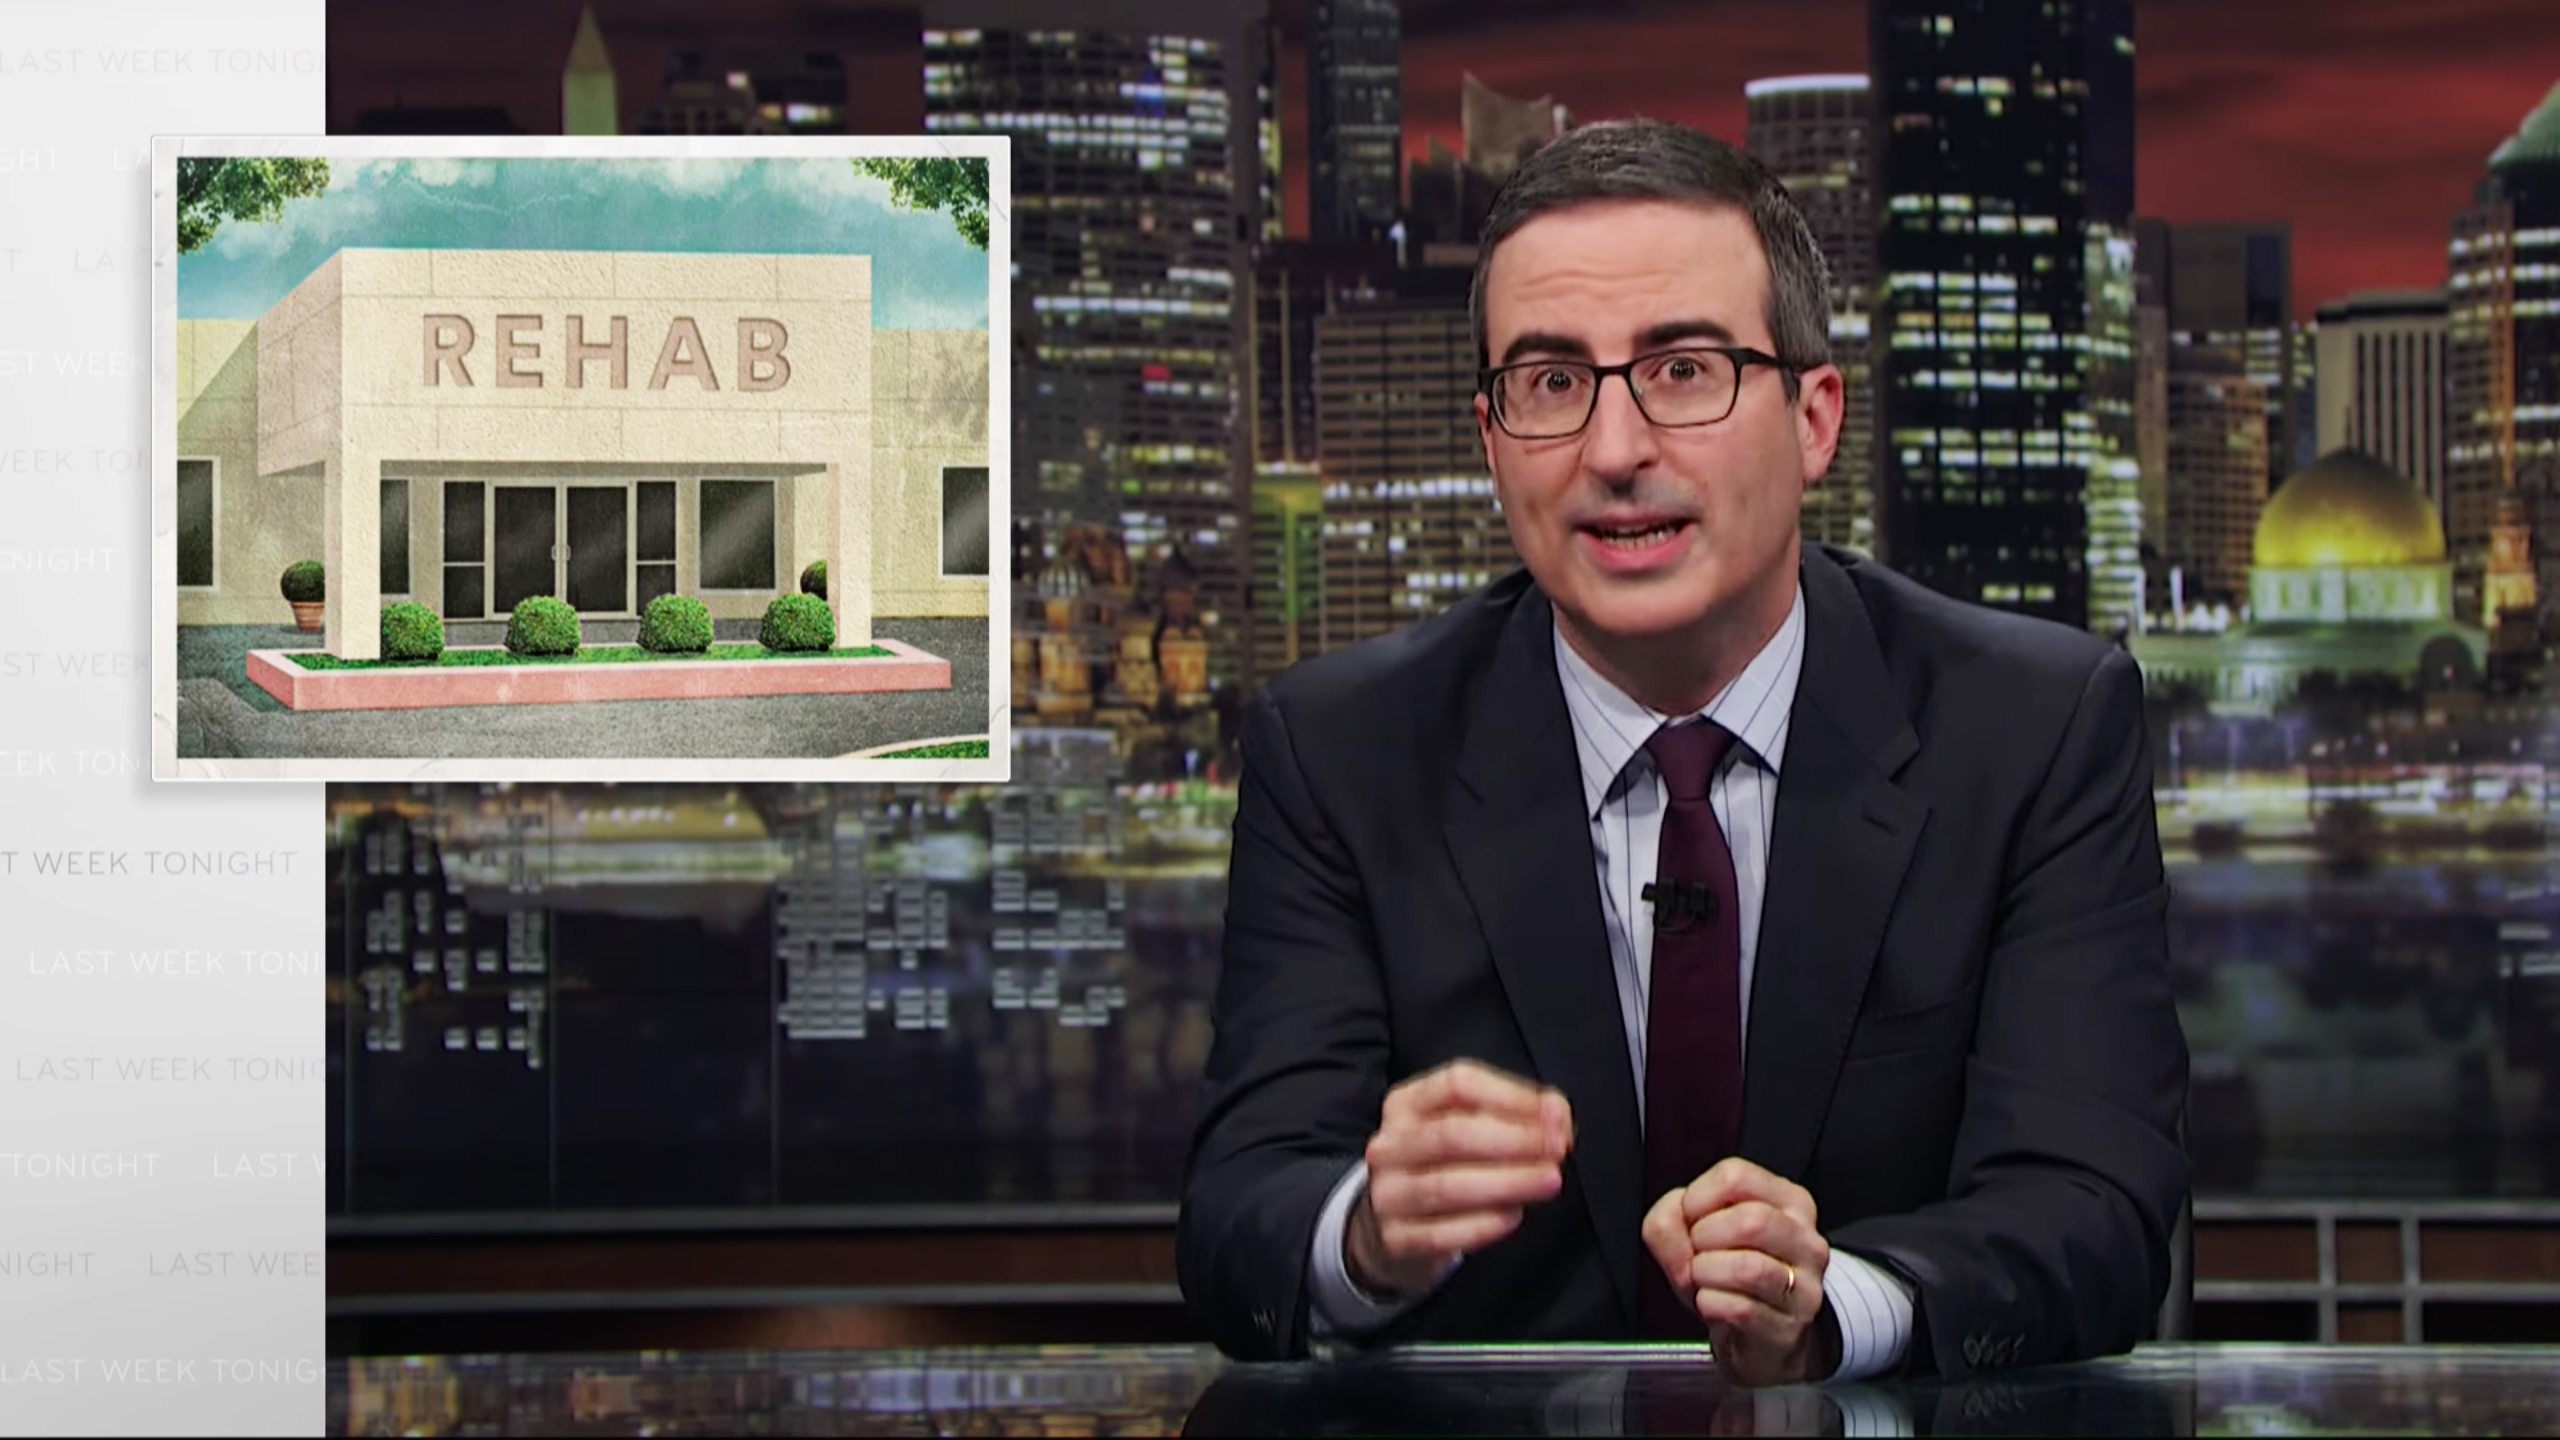 overpaid jobs - john oliver suits - Rehab